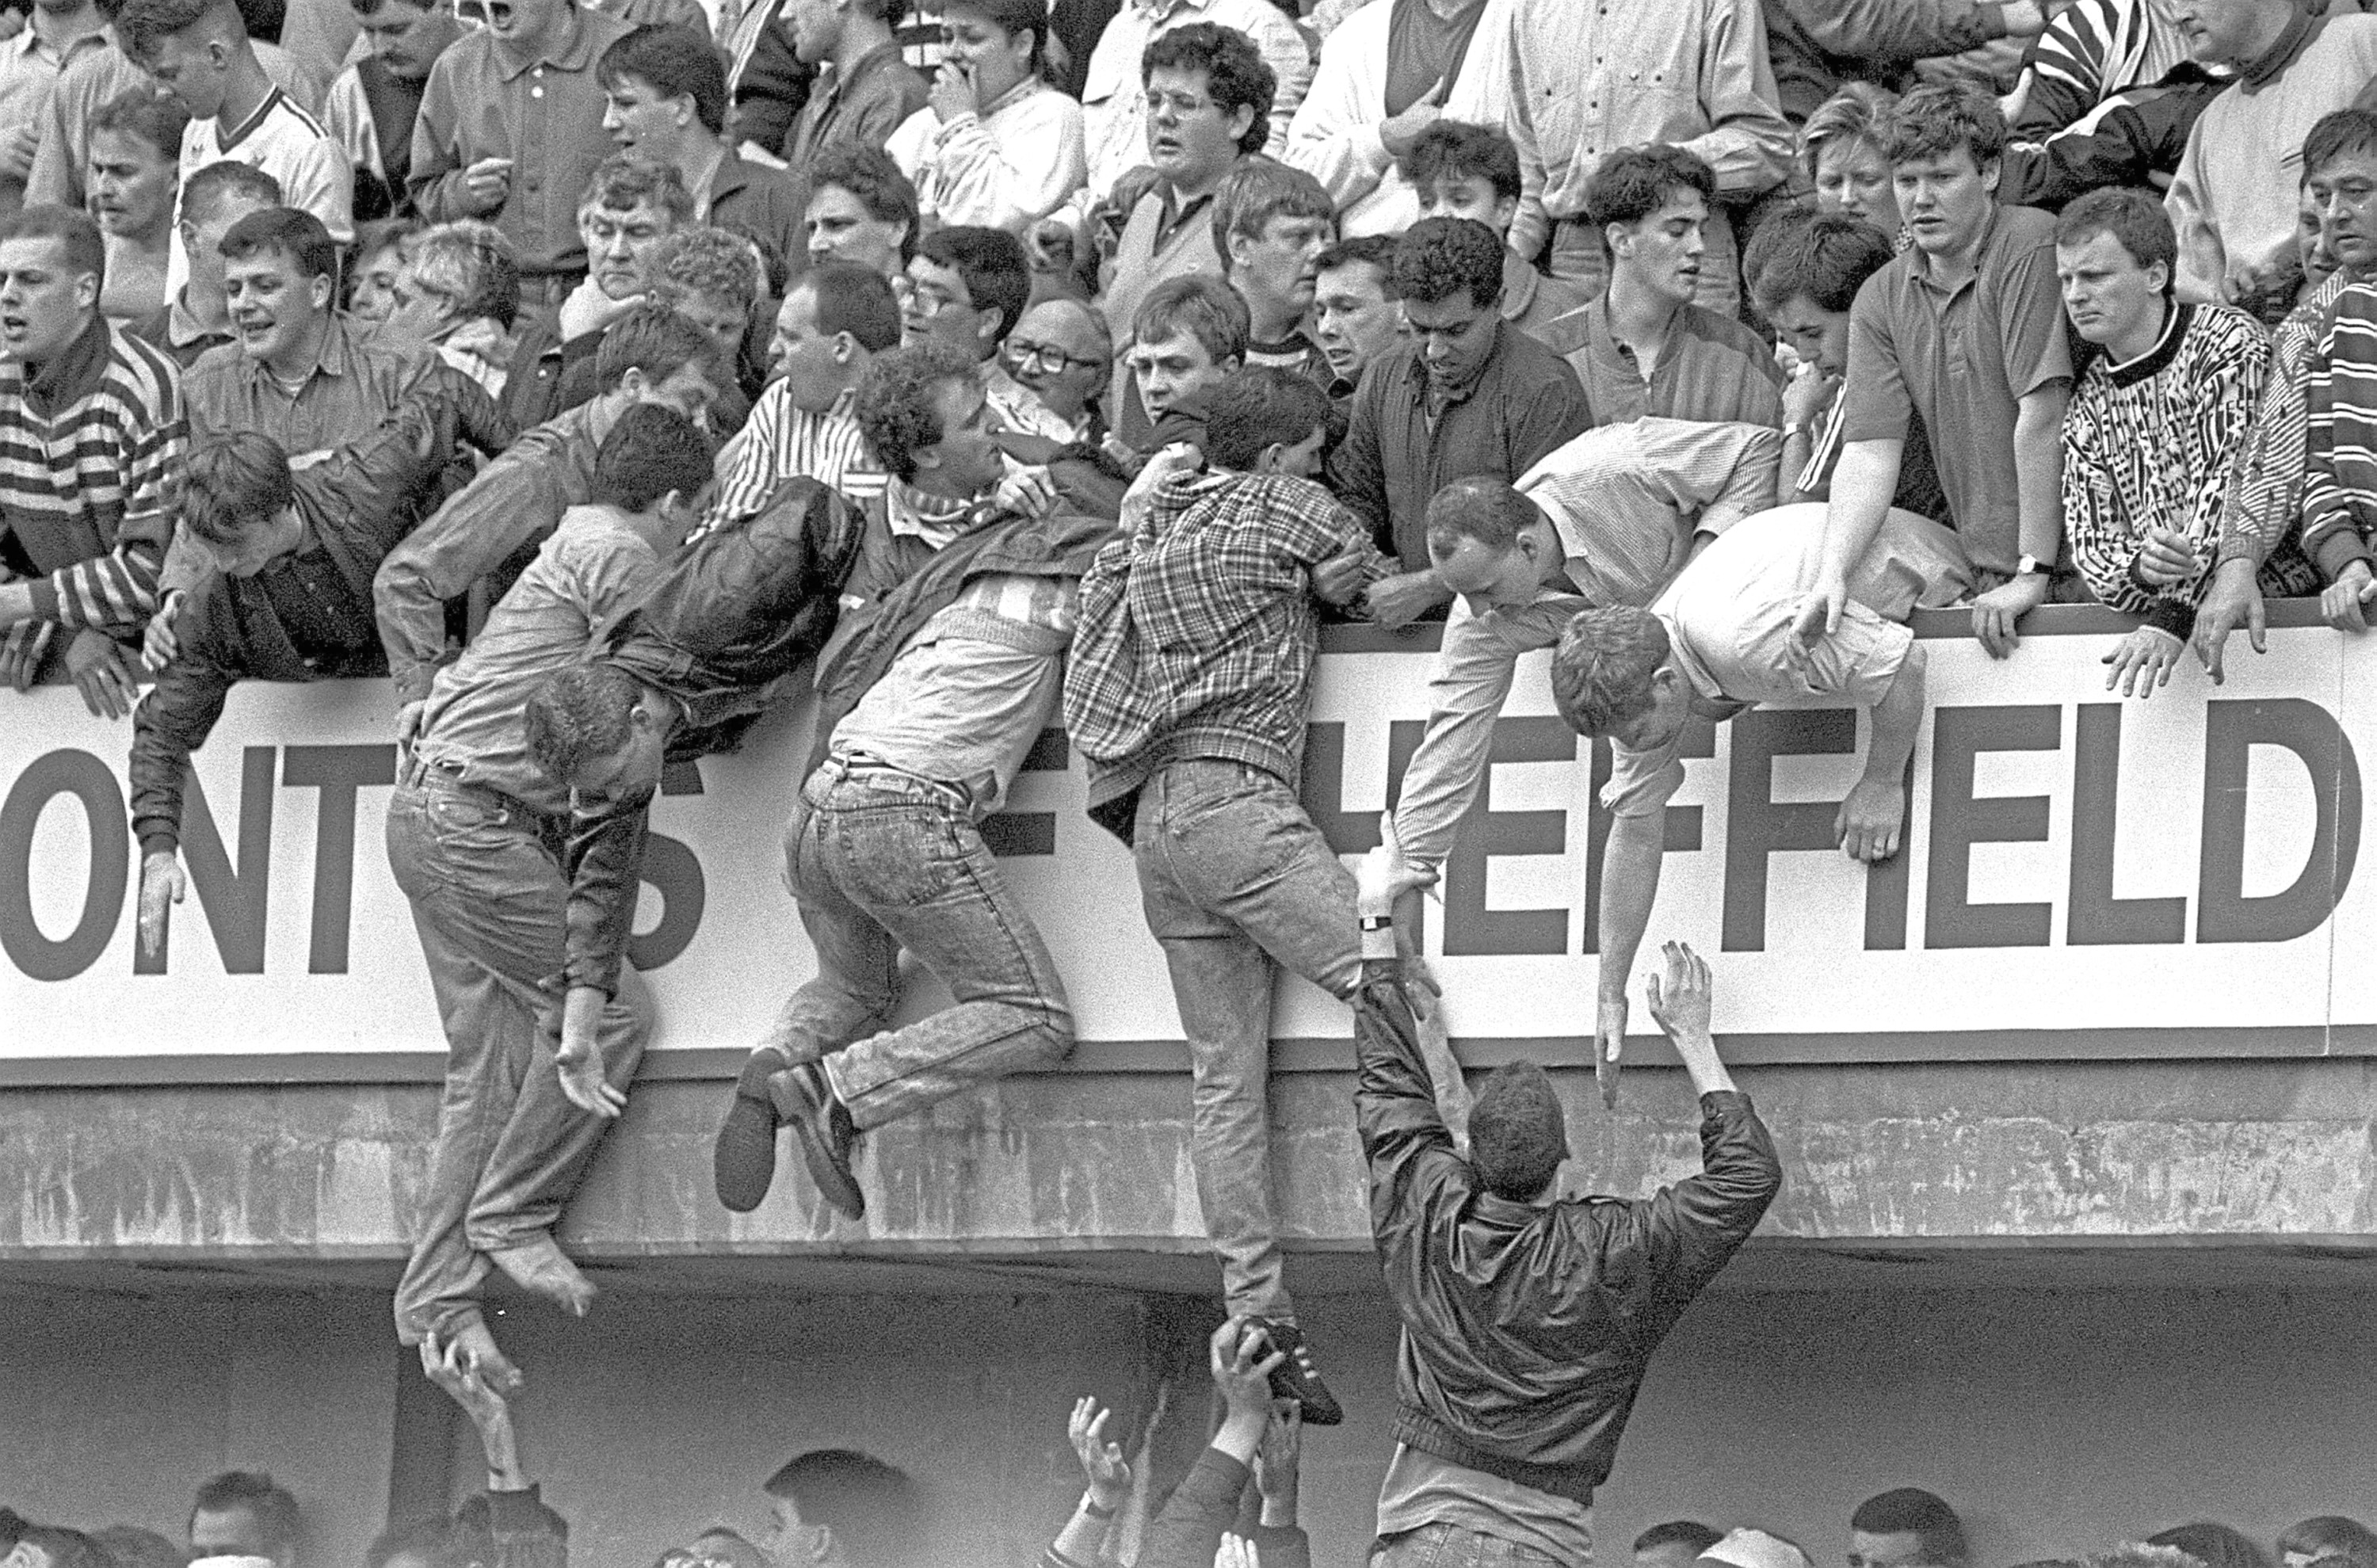 Liverpool fans trying to escape during the Hillsborough disaster